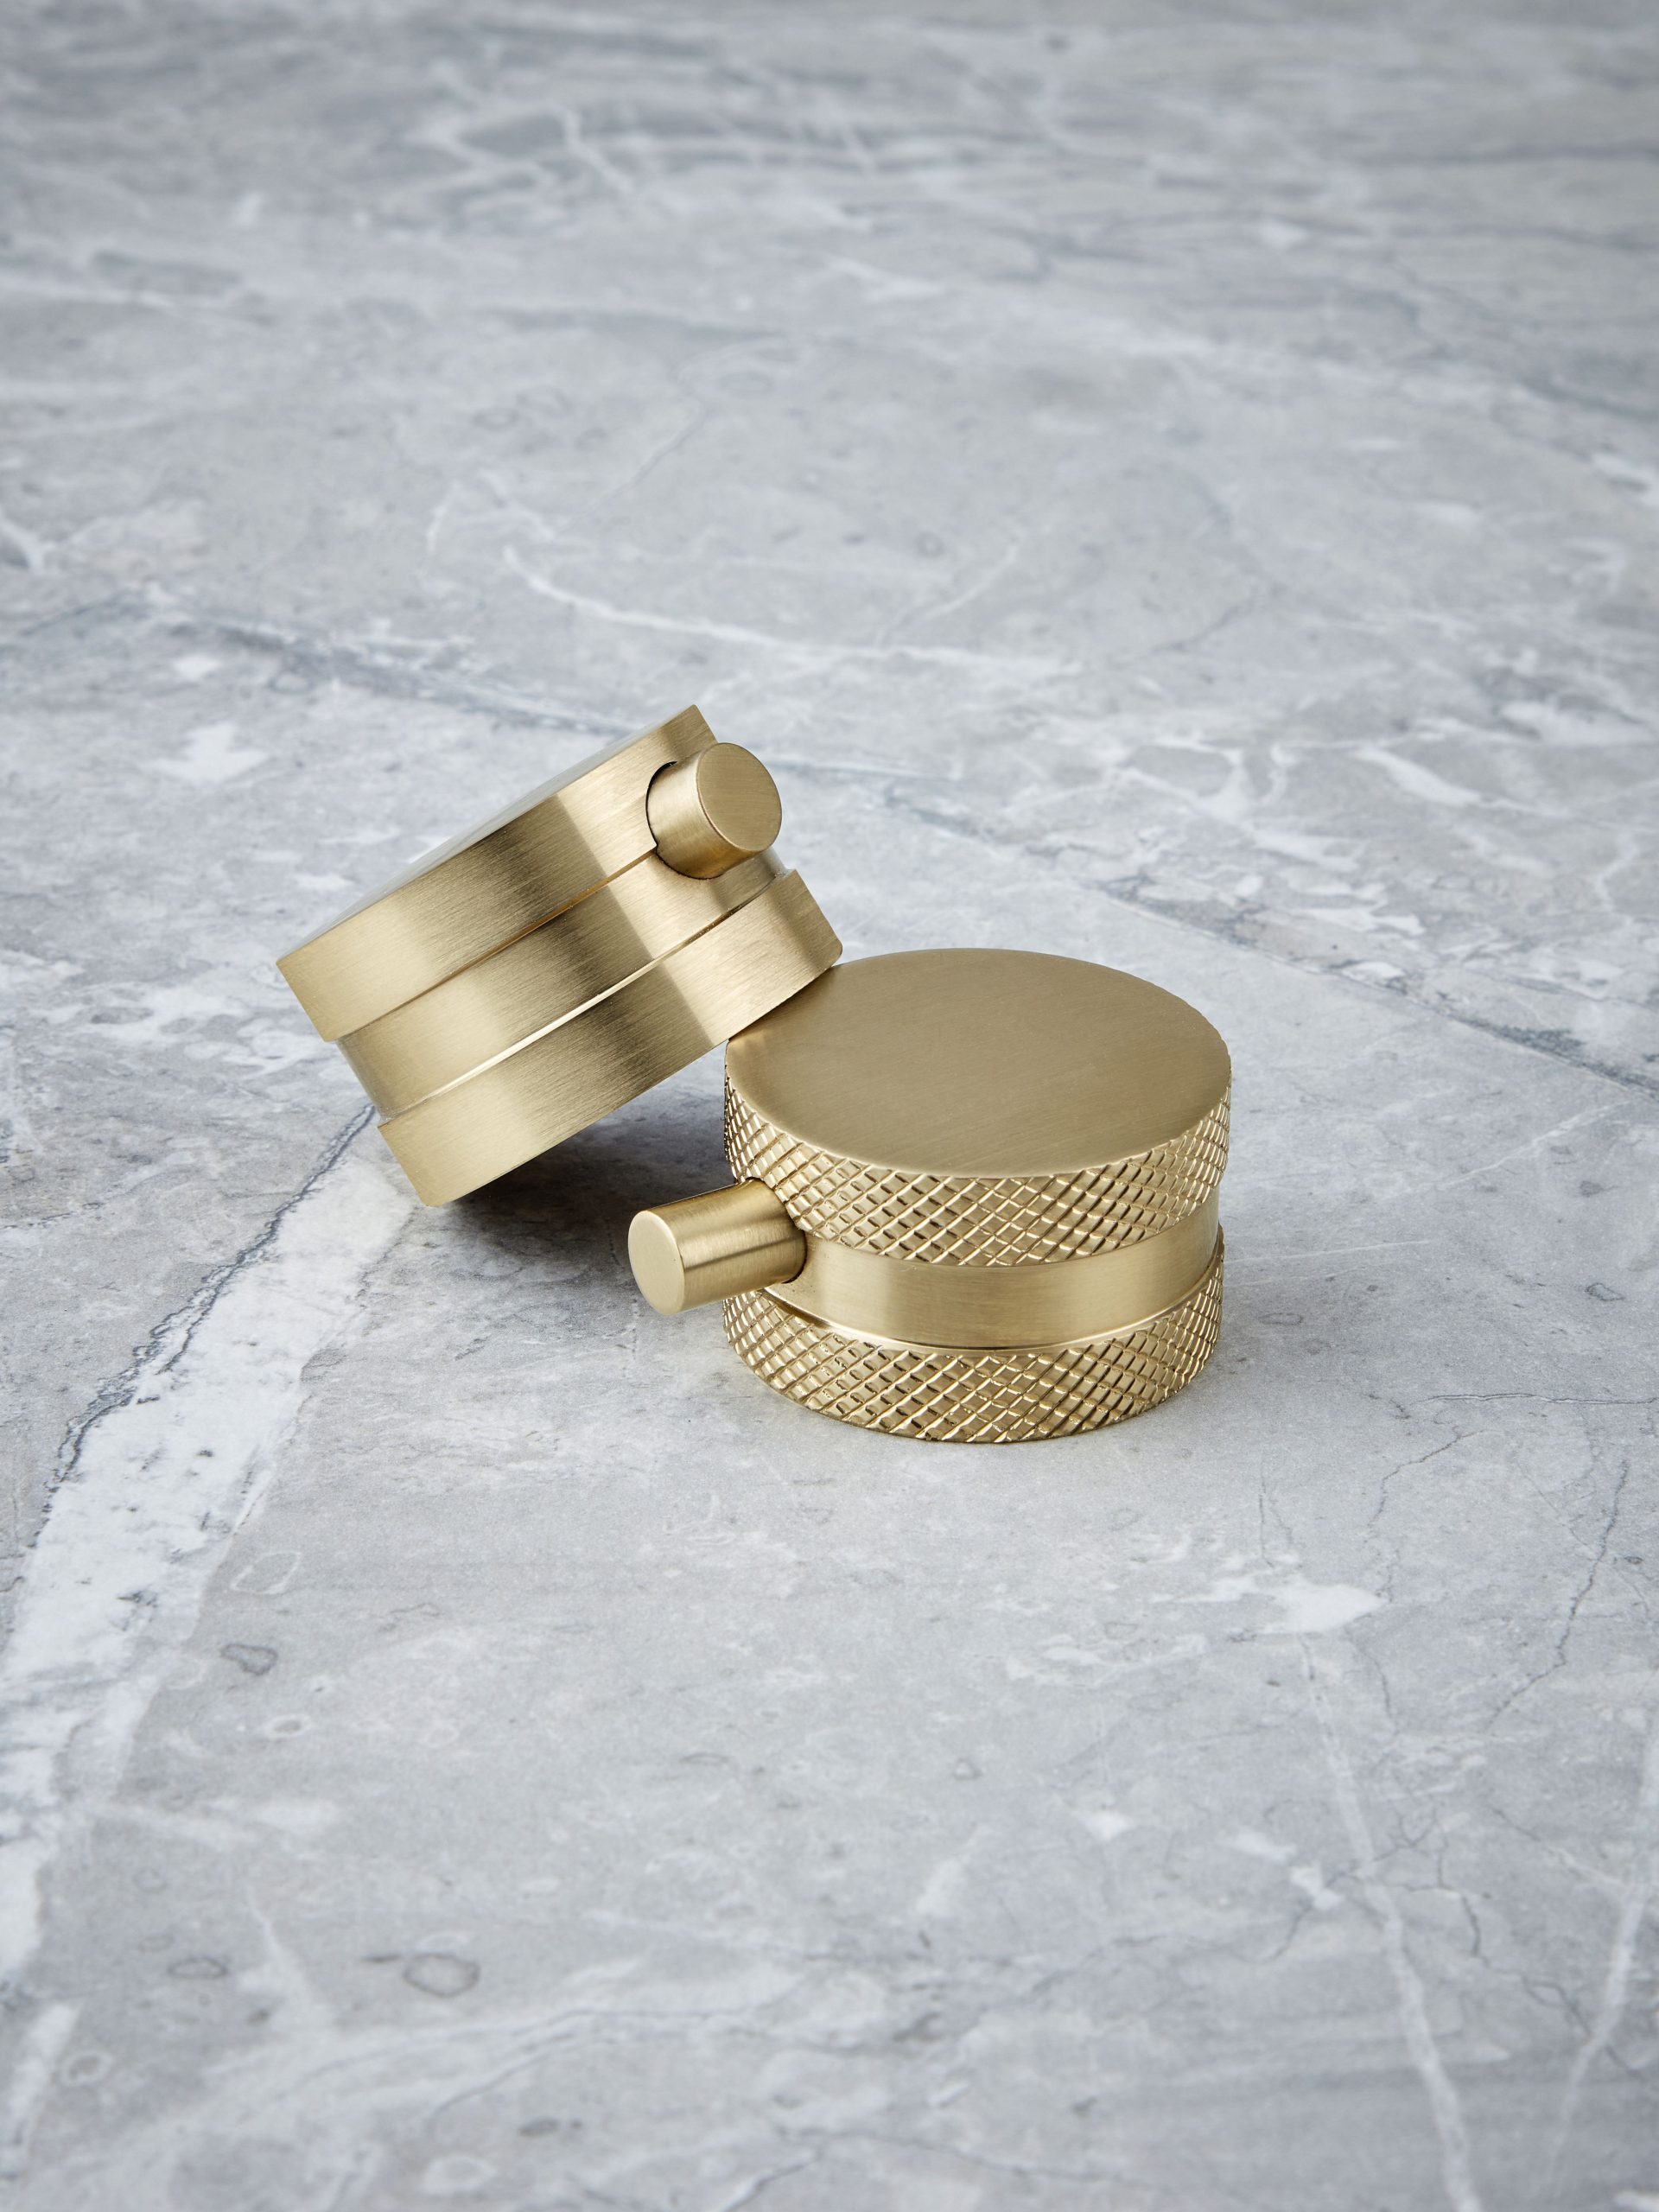 Scudo Core Cross Hatch & Smooth Handle Brushed Brass. Both are supplied with the tap so you can choose the look.